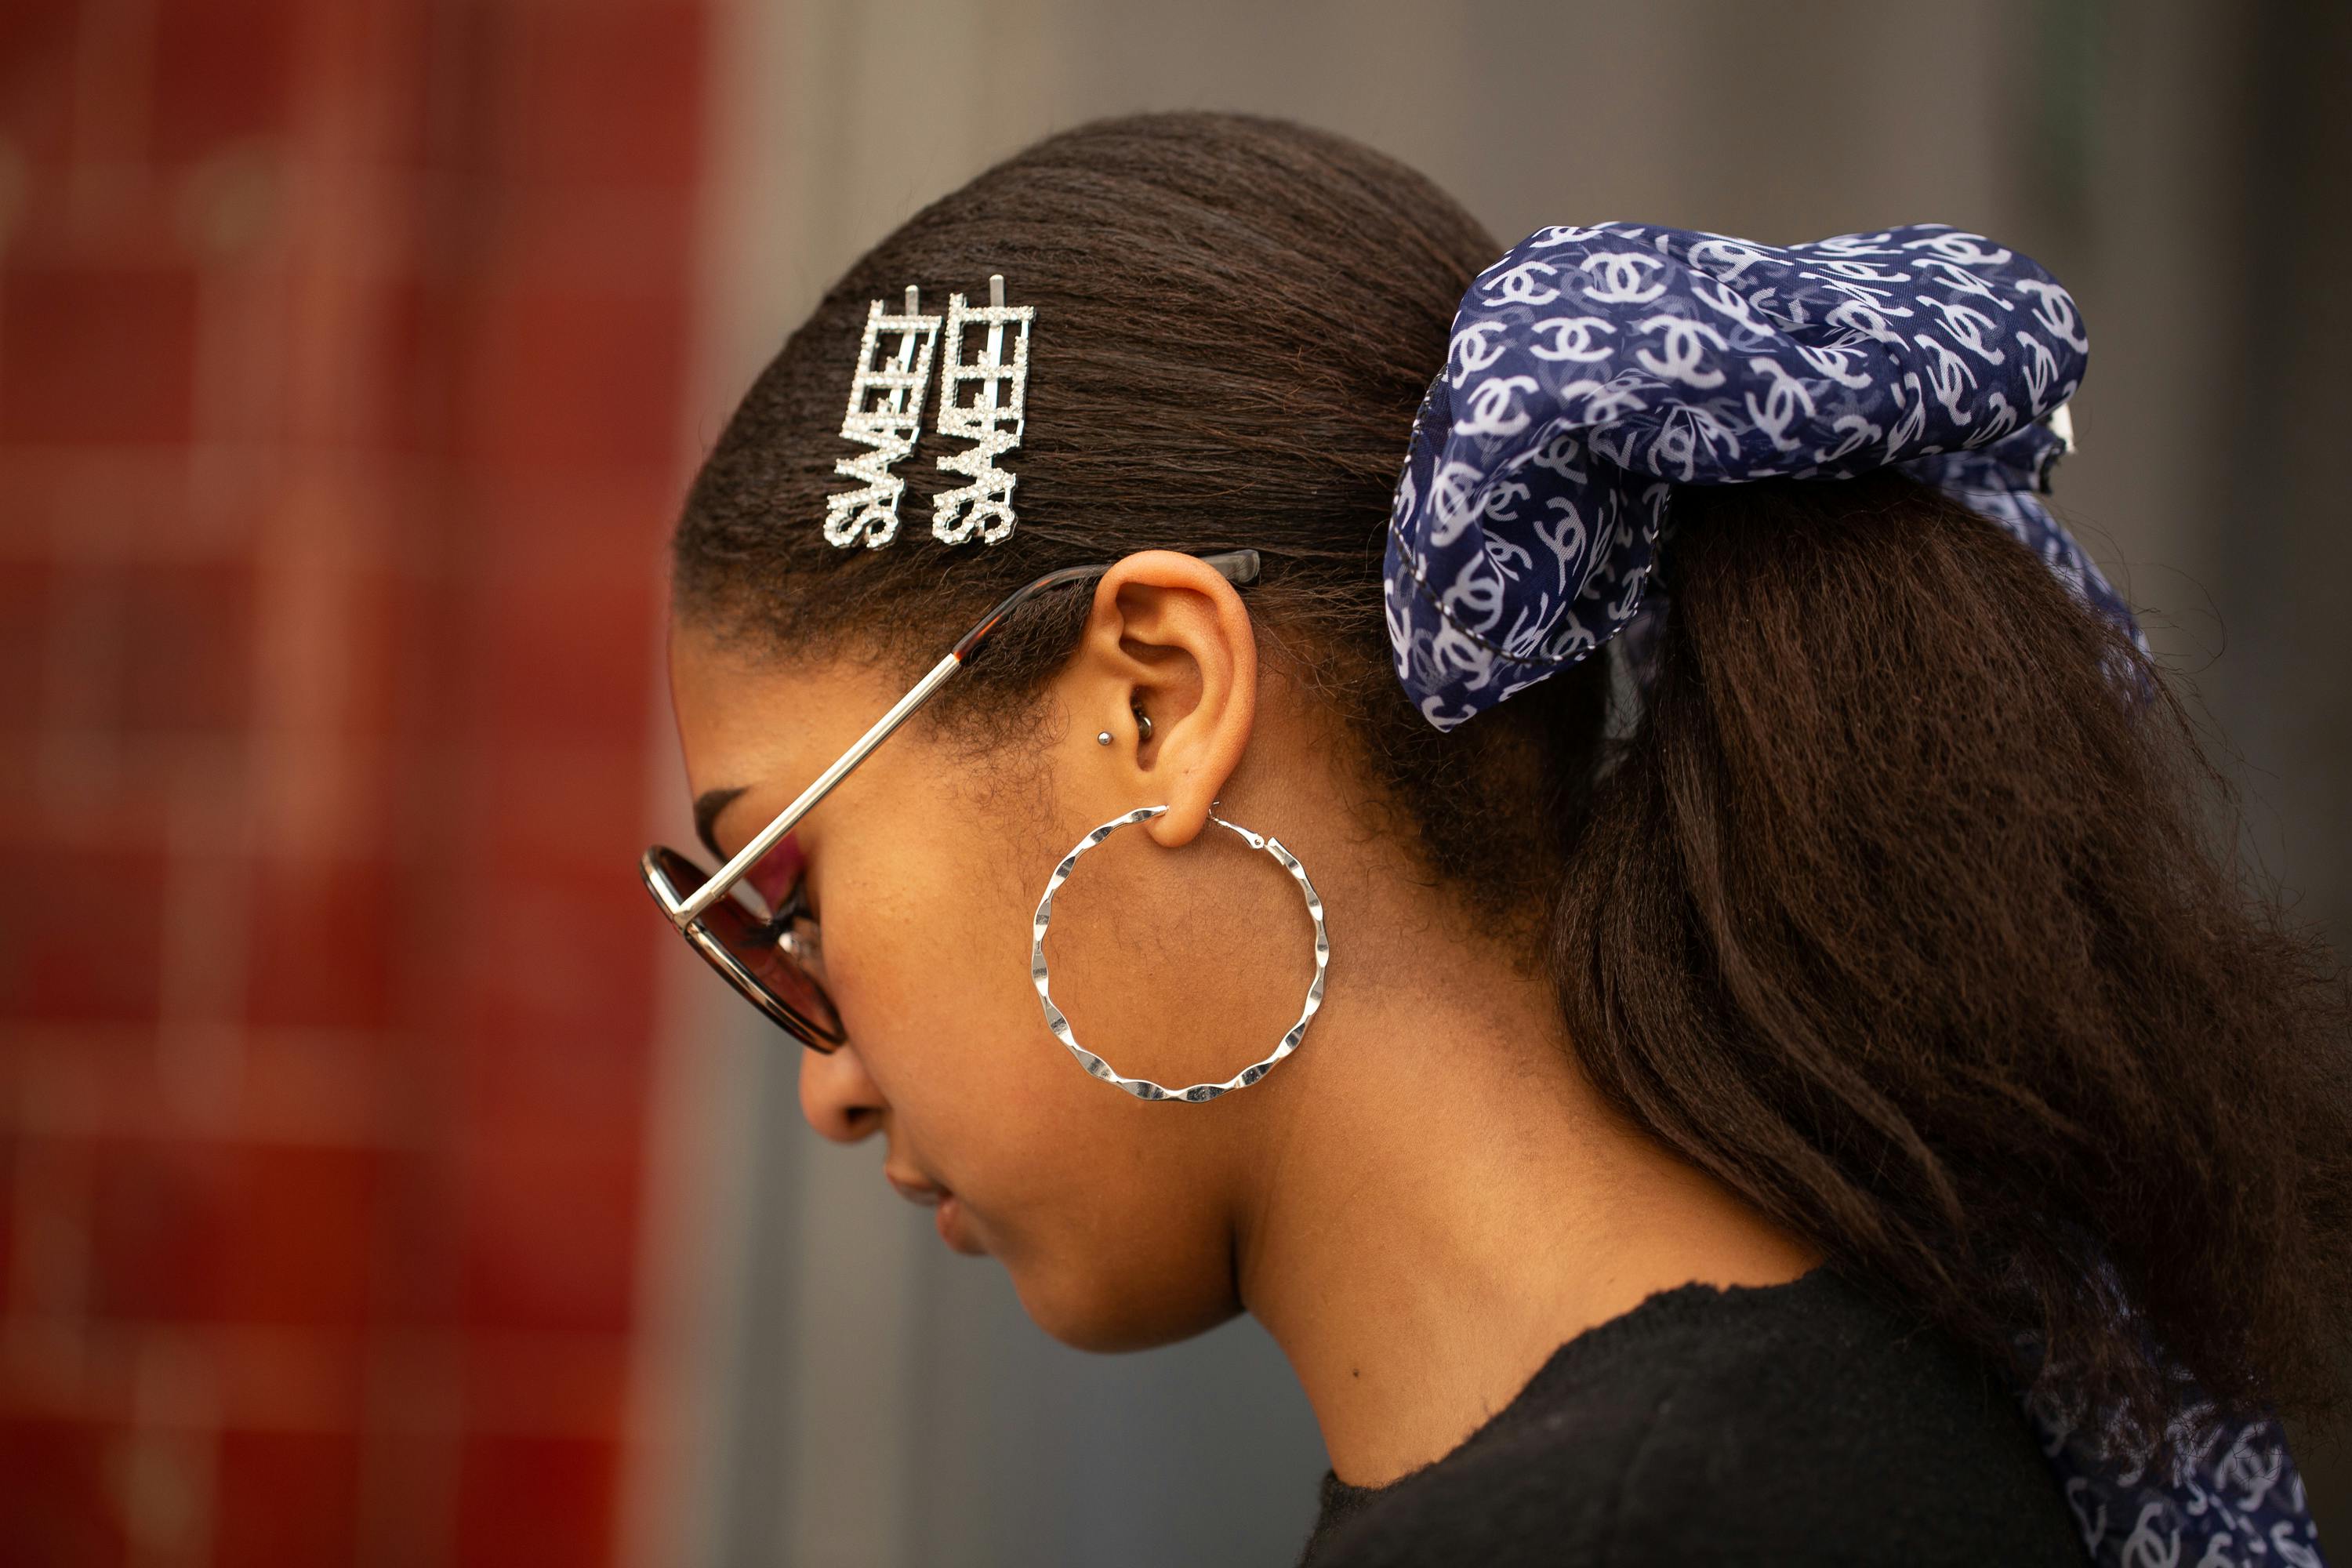 The 8 Best Hair Accessory Trends of 2023